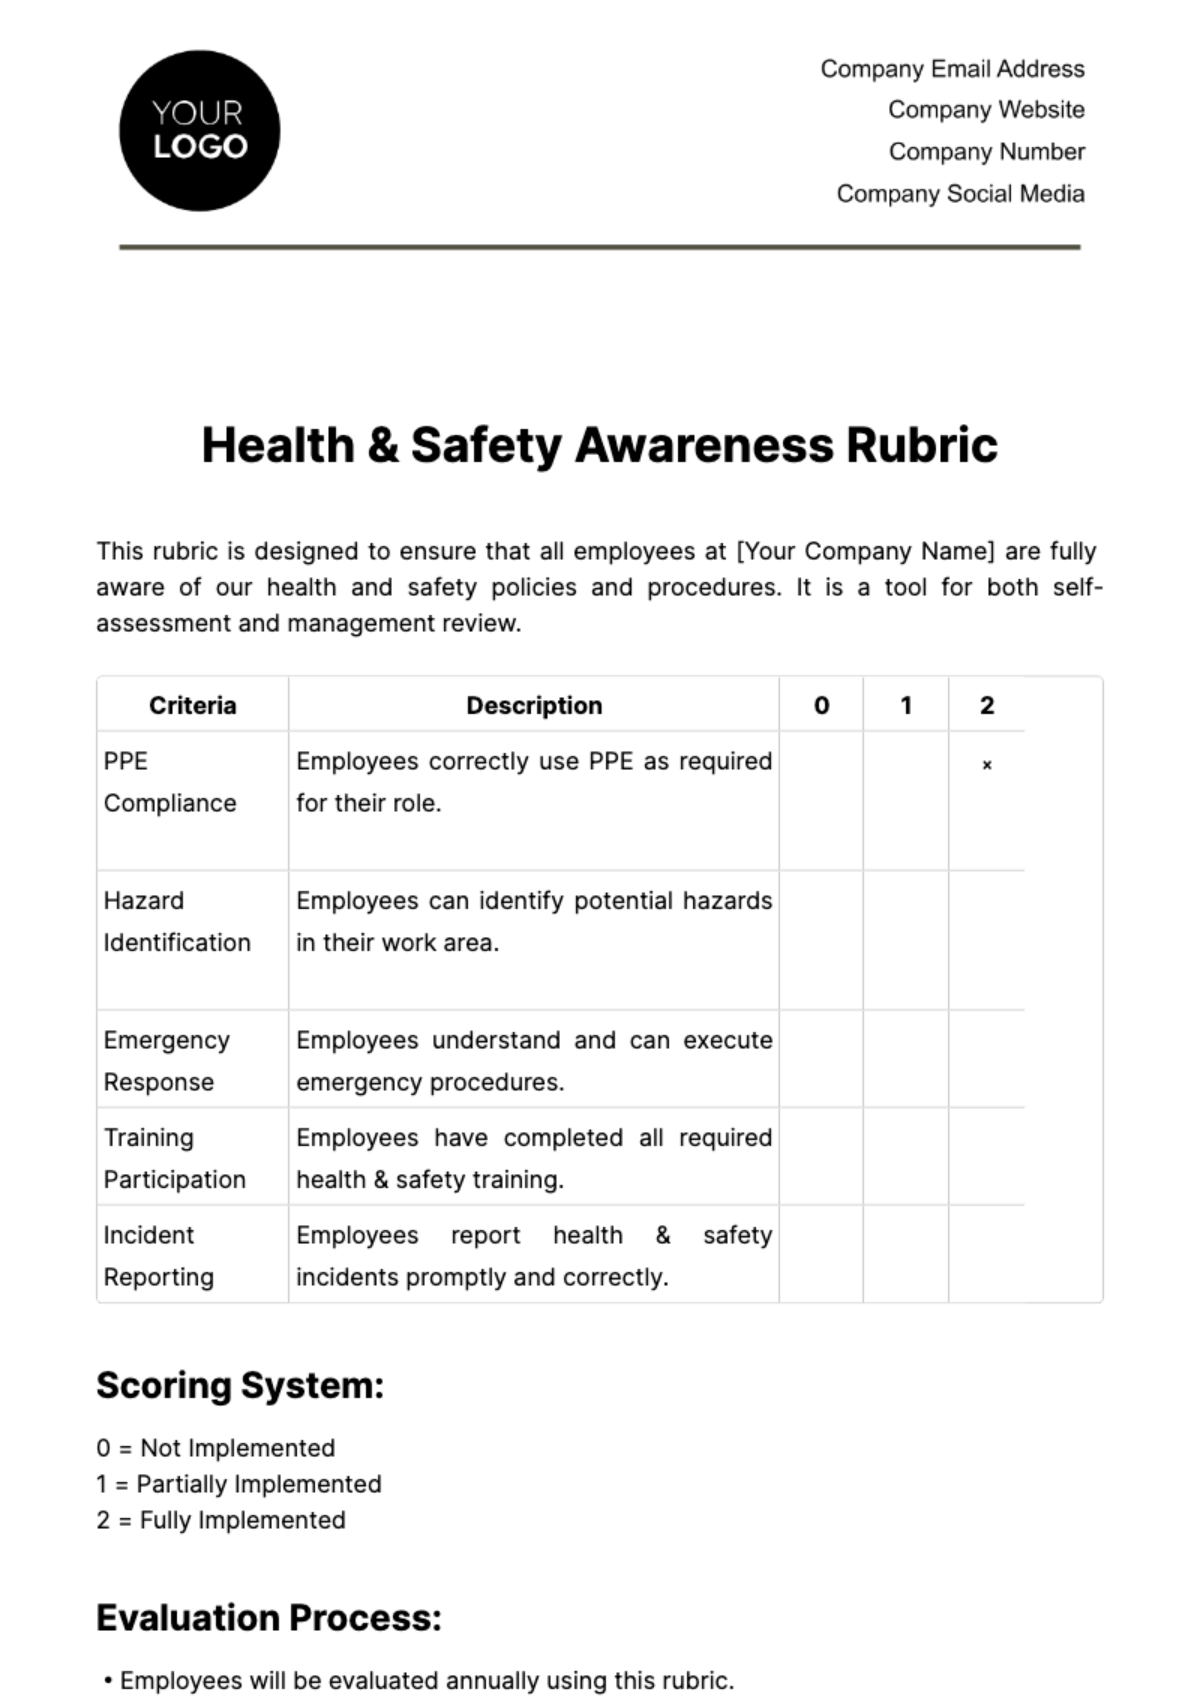 Health & Safety Awareness Rubric Template